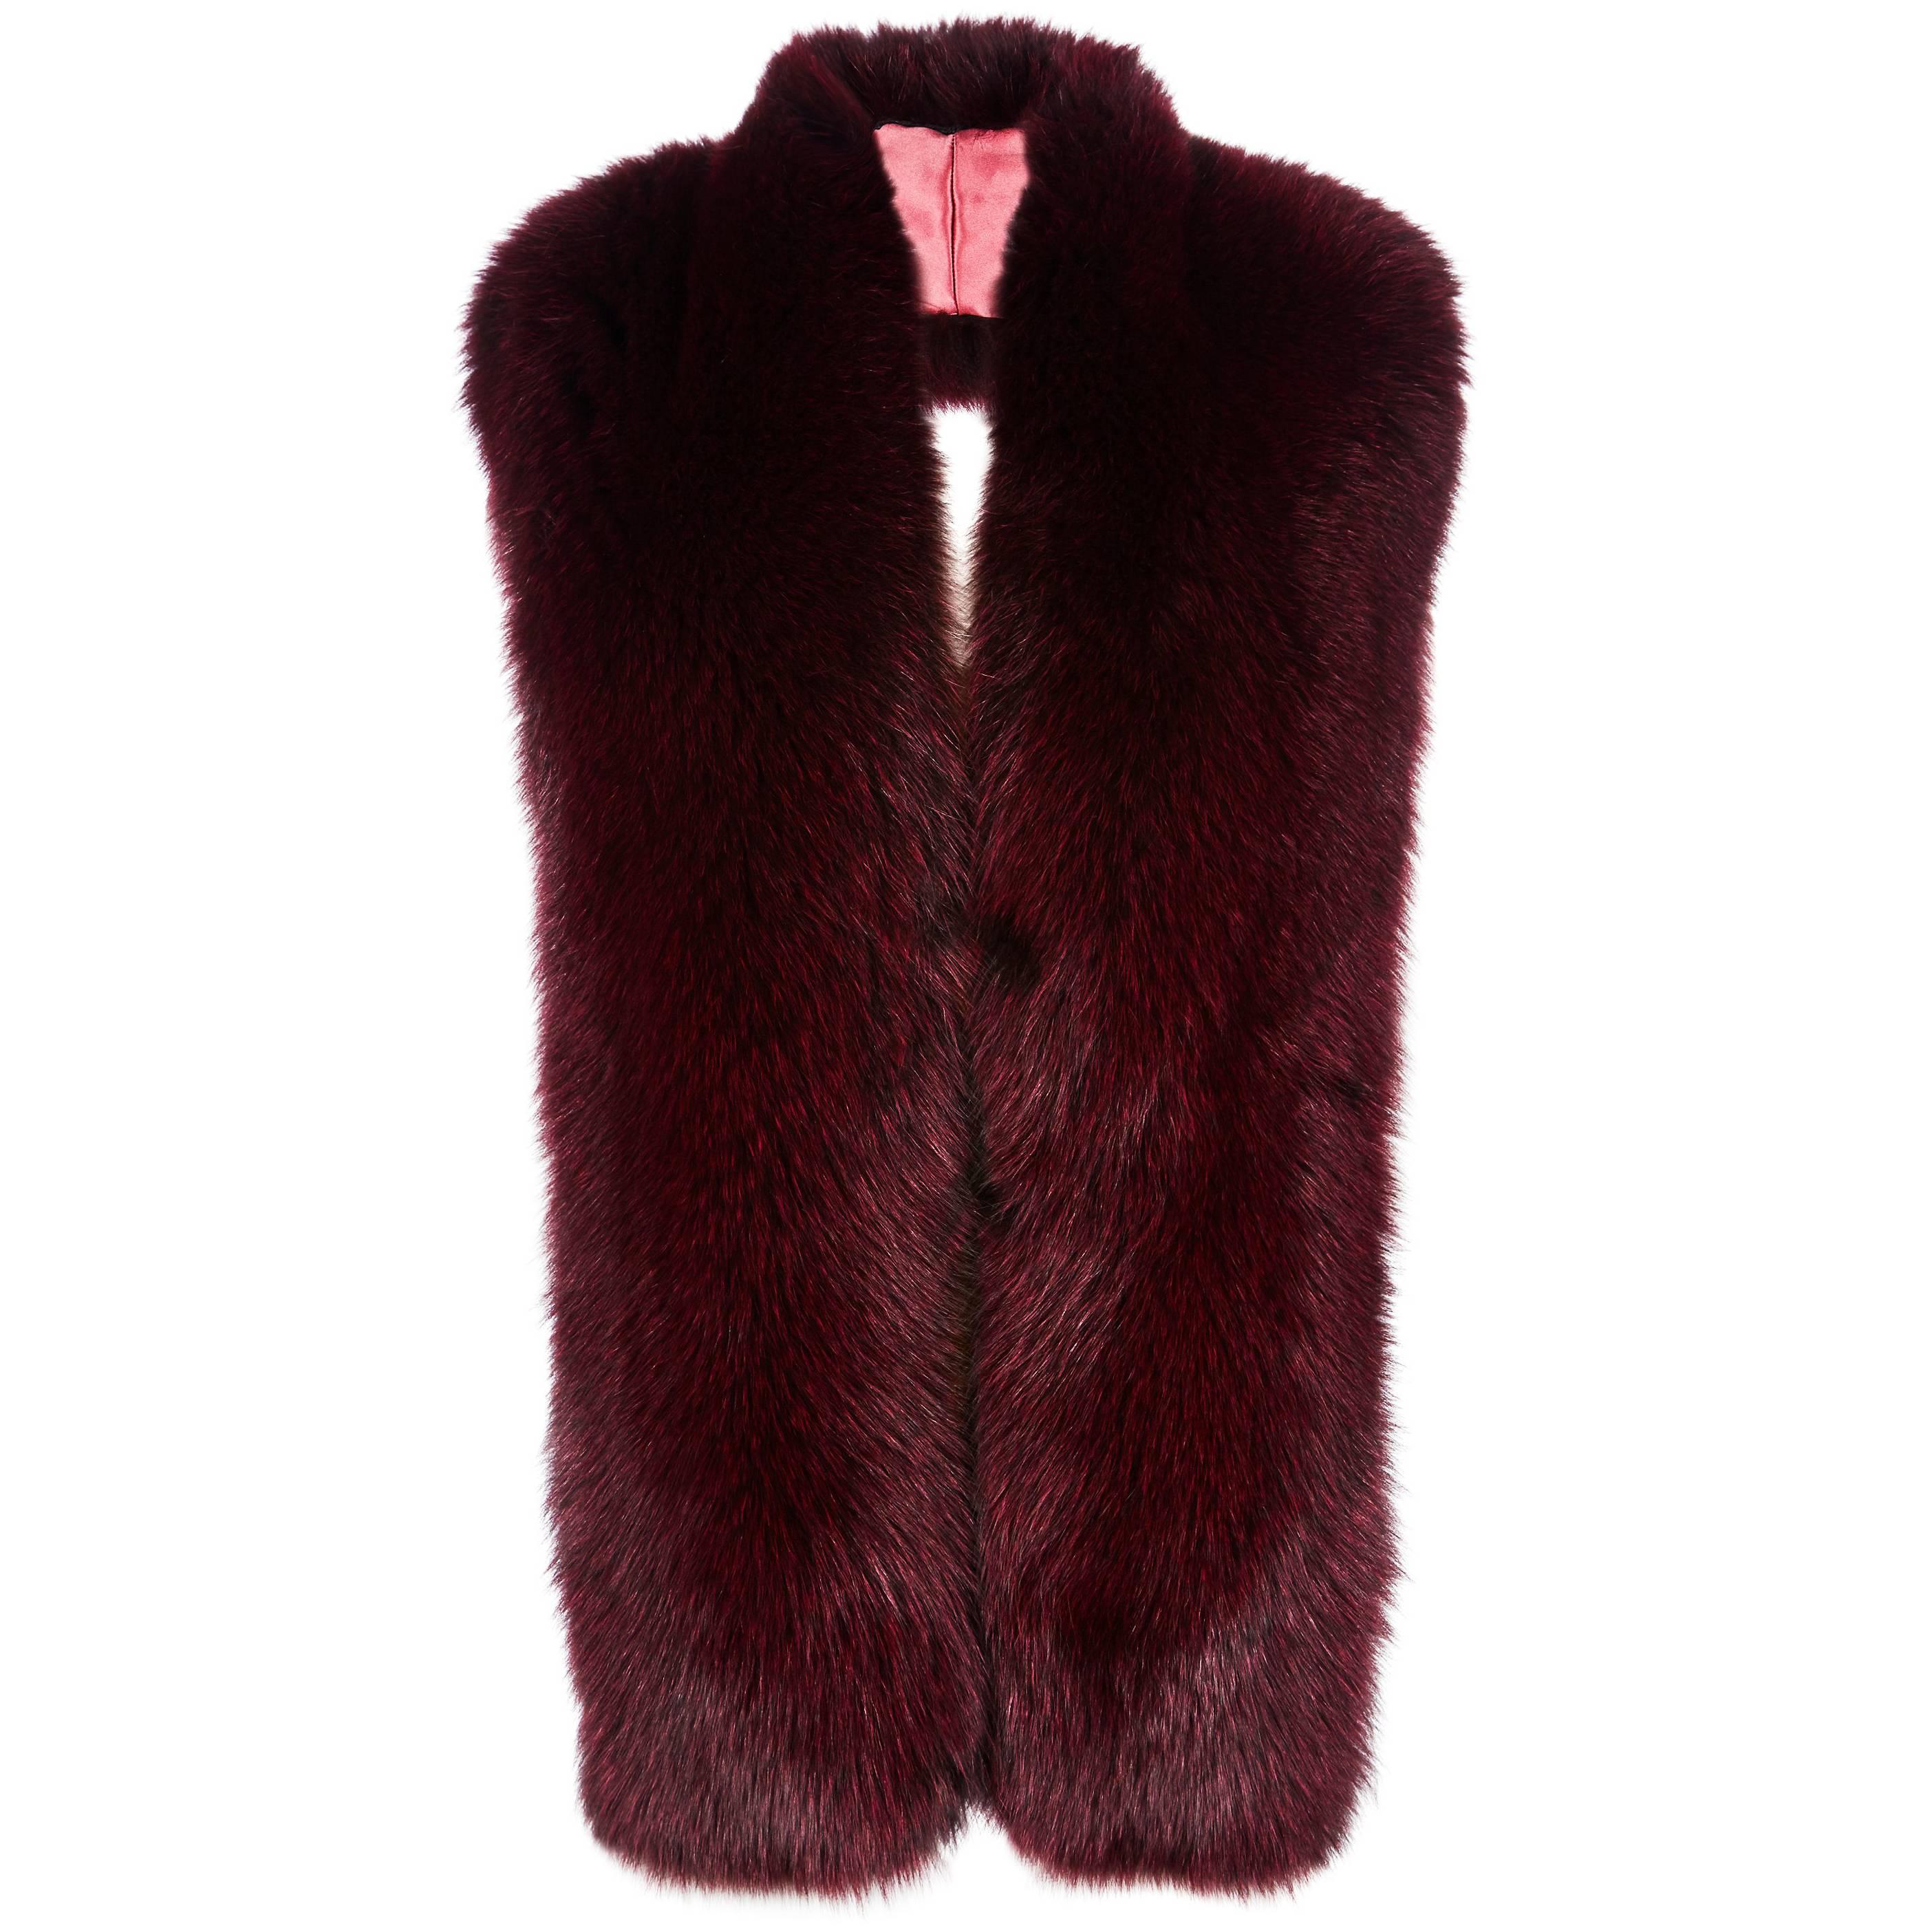 The perfect Valentines gift for someone special - free monogramming on 100% silk lining on request. 
The Legacy Stole is Verheyen London’s versatile design to be worn from day to night. Crafted in the finest dyed fox fur and lined in coloured silk